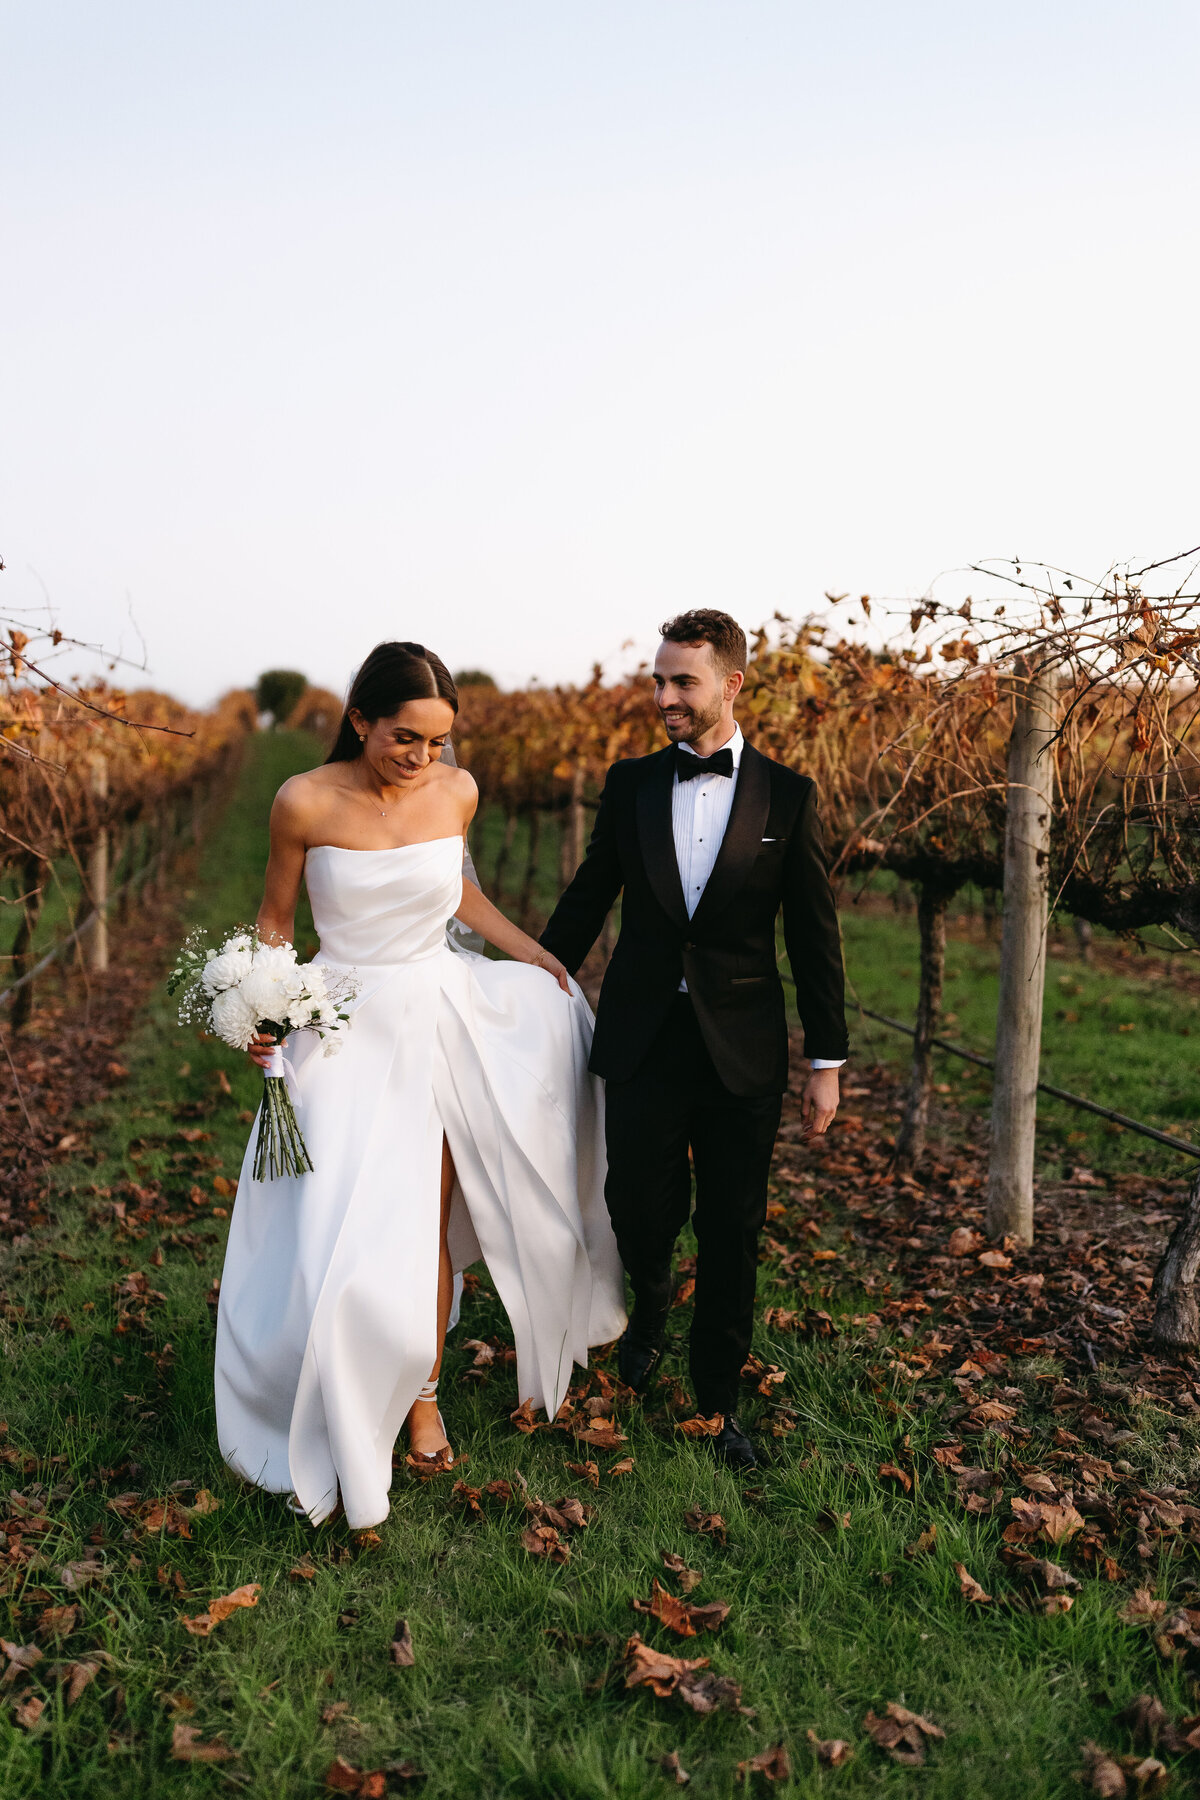 An image of a bride and groom in a leafy vineyard. The bride is holding her dress up. The groom is looking toward her and is supporting her as she walks through the vineyard.